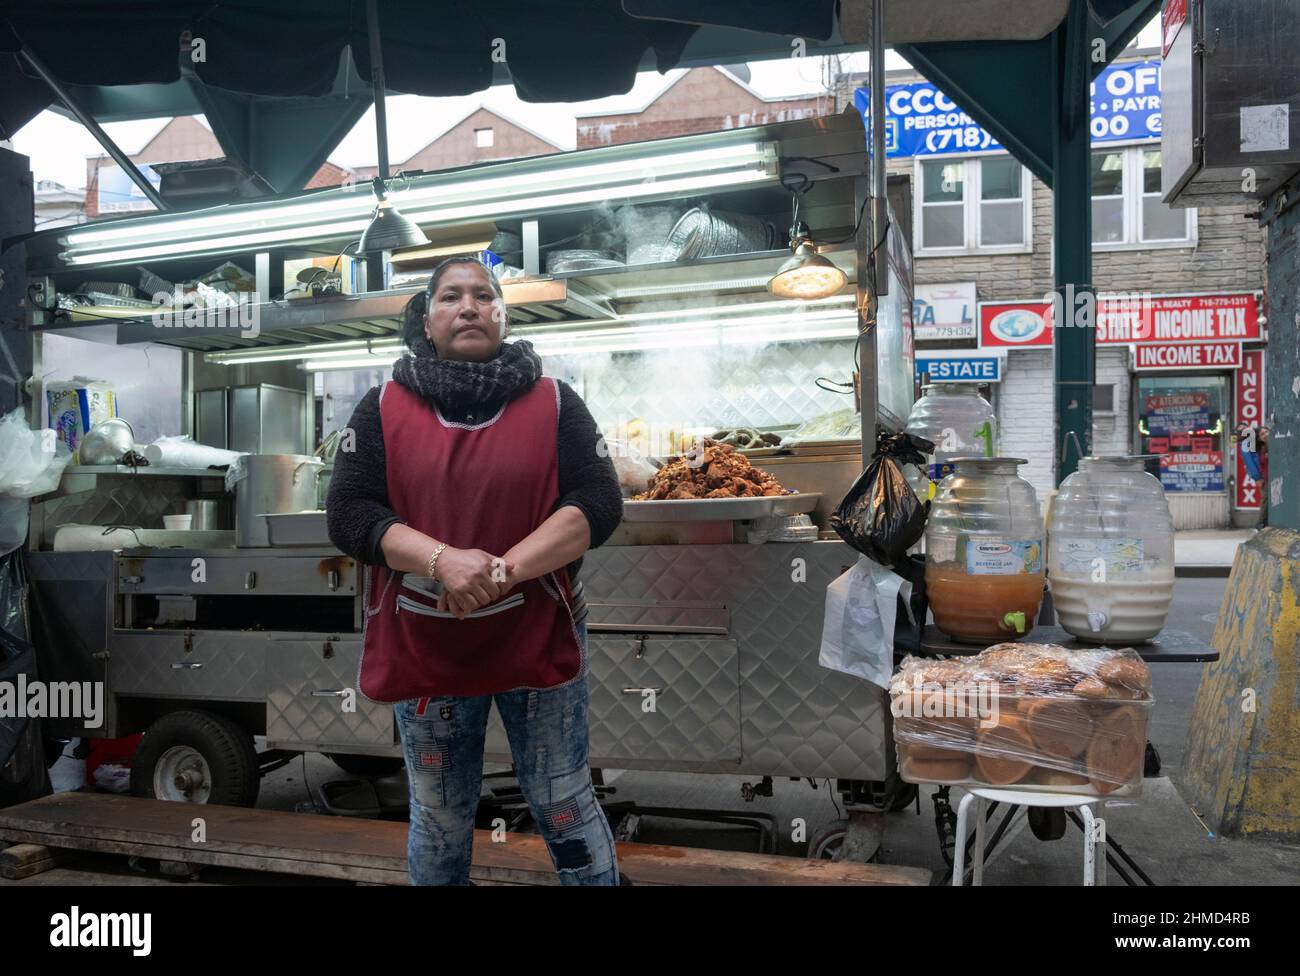 A South American woman selling grilled meats & other foods from a cart just off Roosevelt Ave. and under the elevated subway trains . Stock Photo